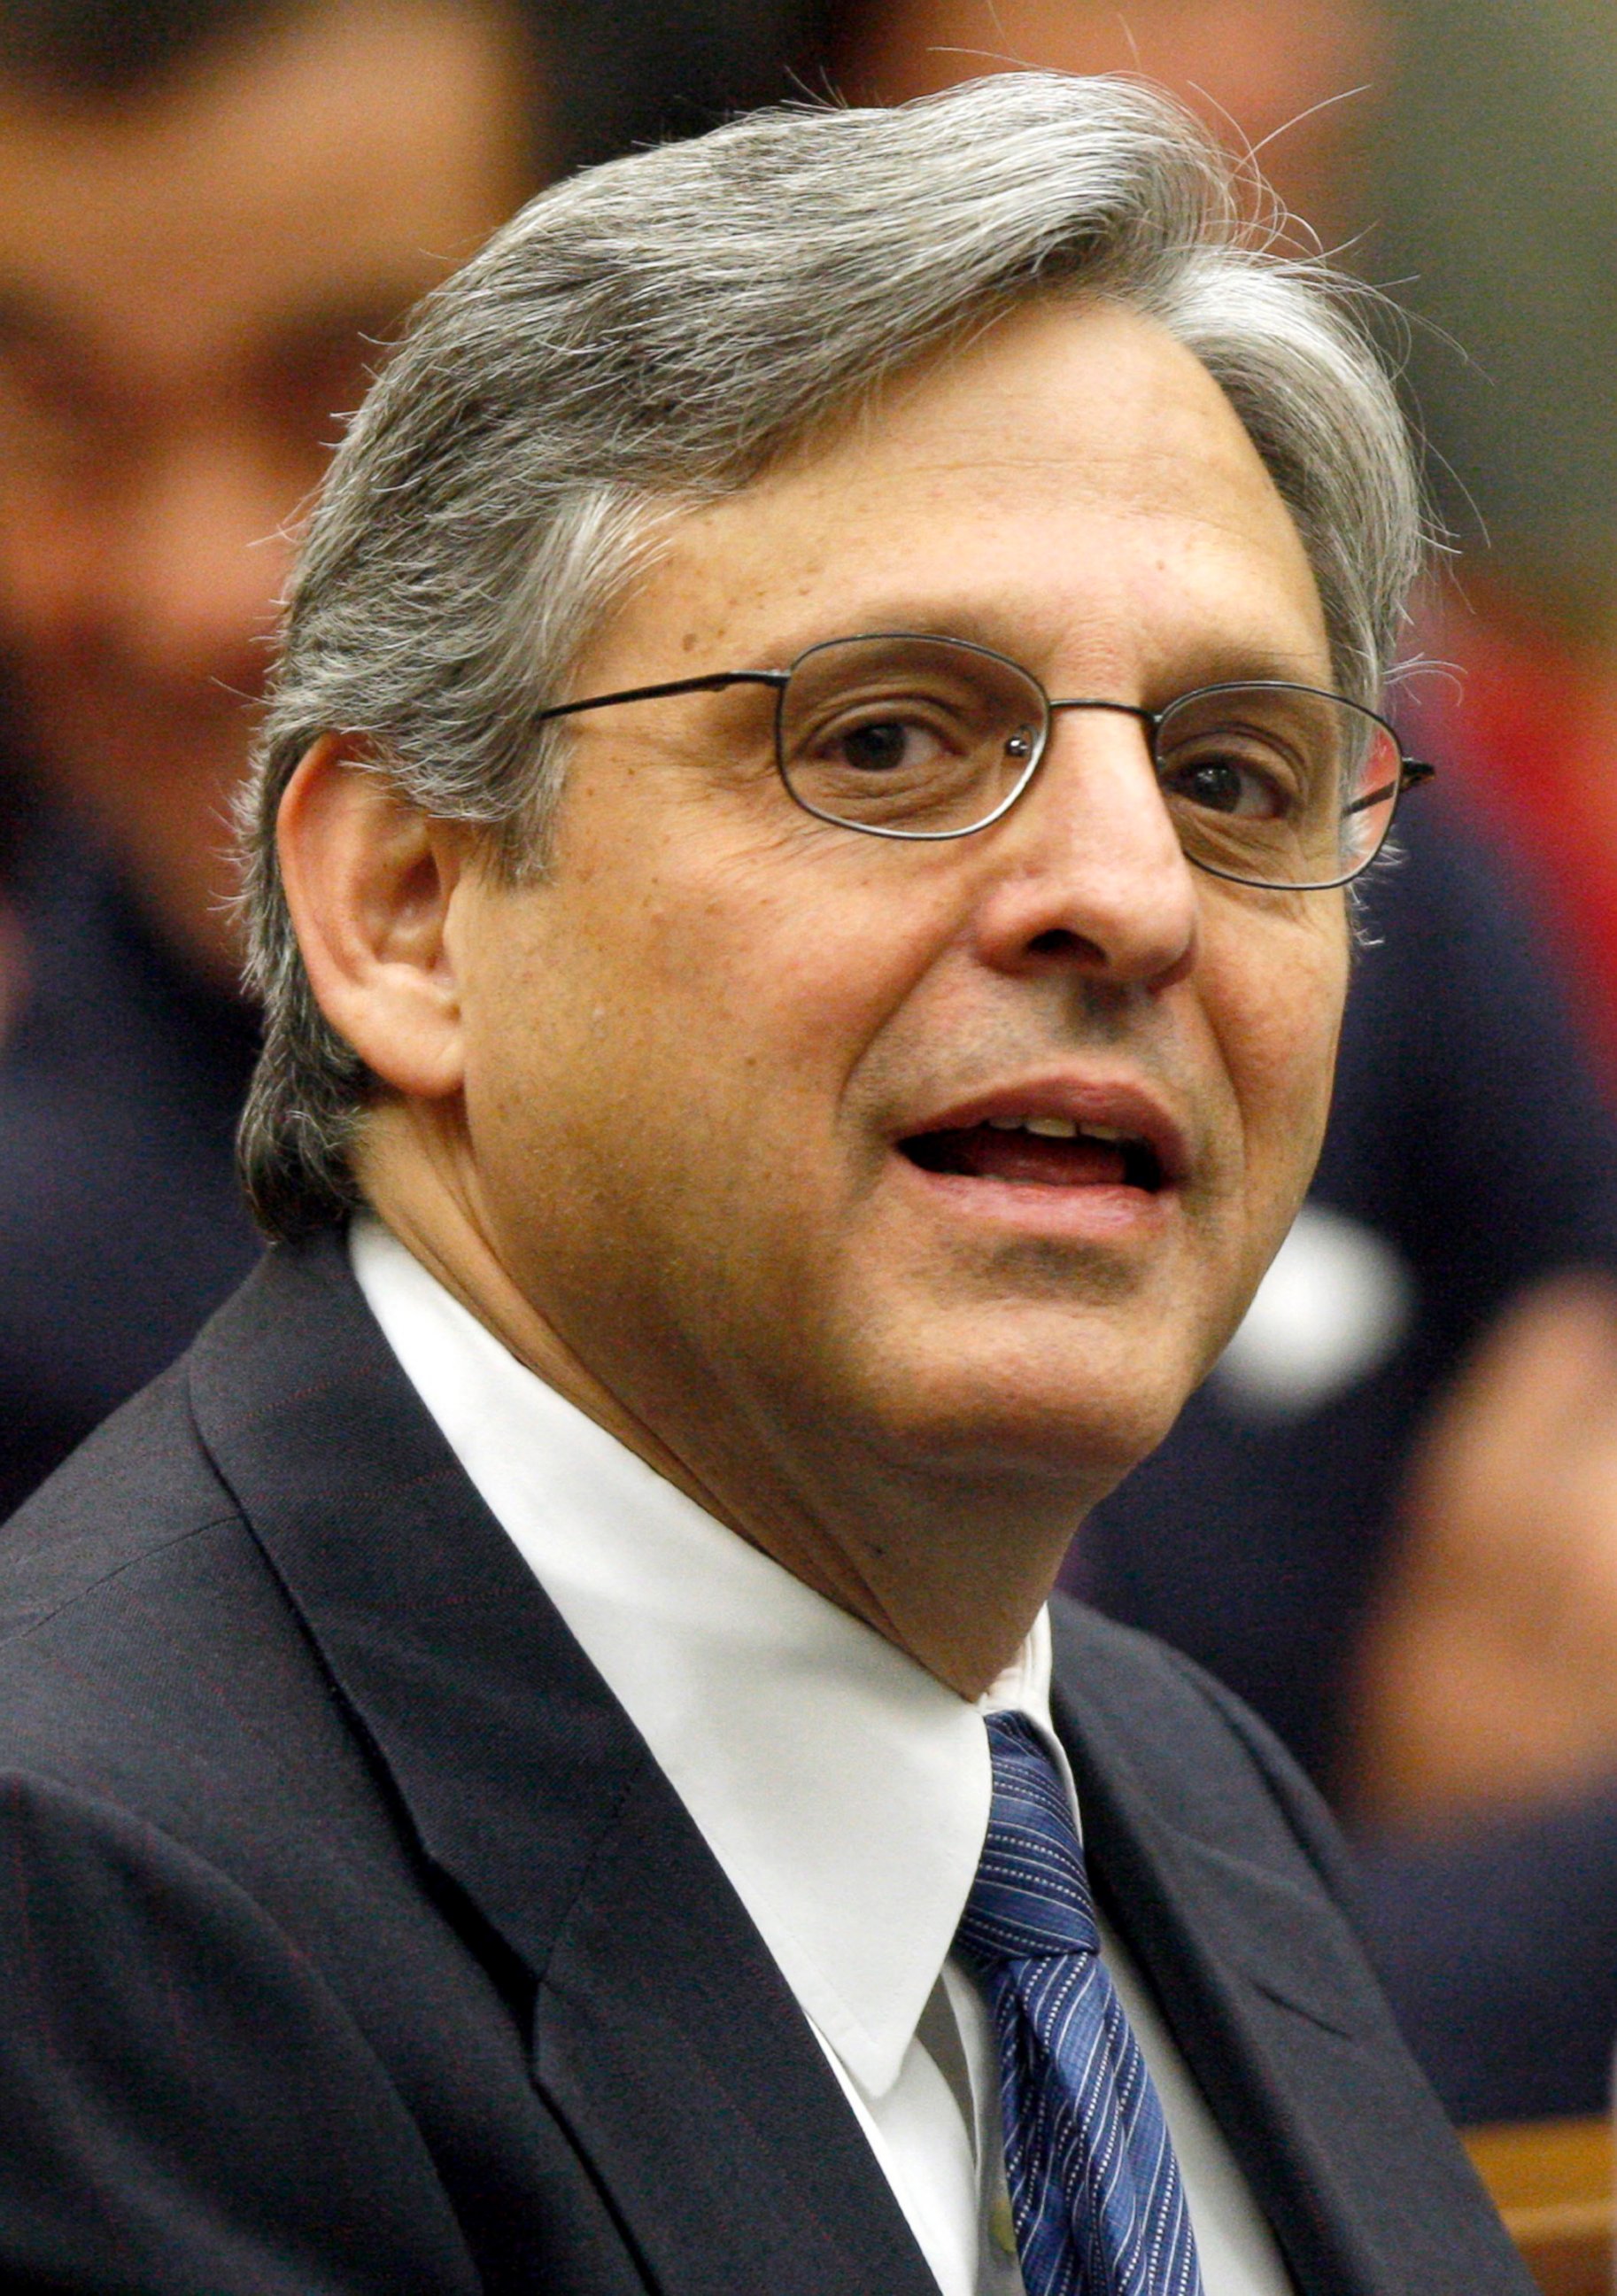 PHOTO:In this May 1, 2008 file photo, Judge Merrick Garland is pictured before the start of a ceremony at the federal courthouse in Washington.   